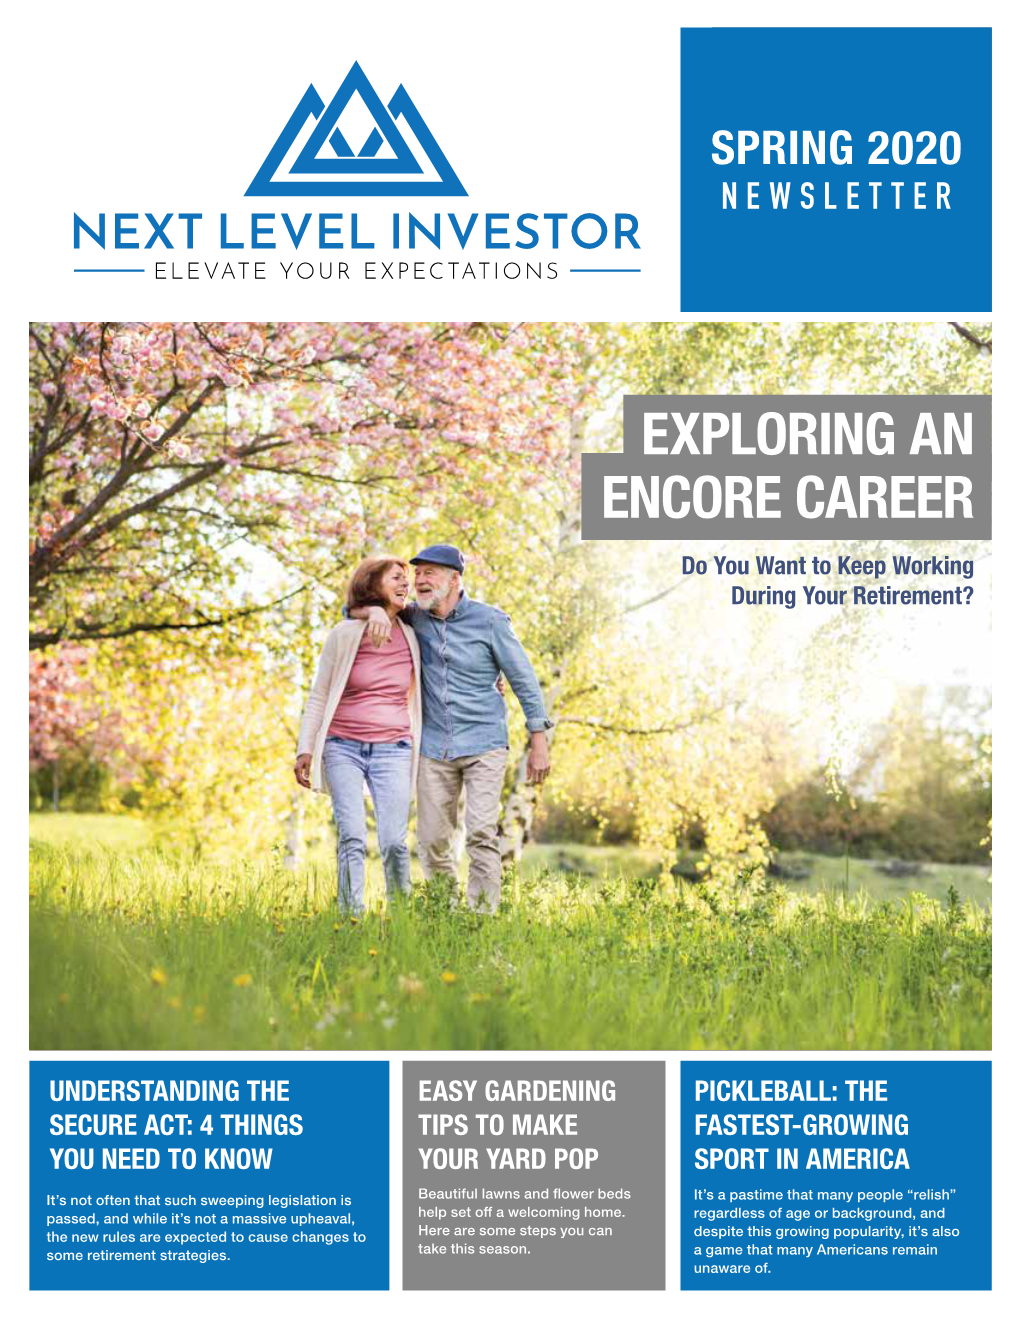 EXPLORING an ENCORE CAREER Do You Want to Keep Working During Your Retirement?